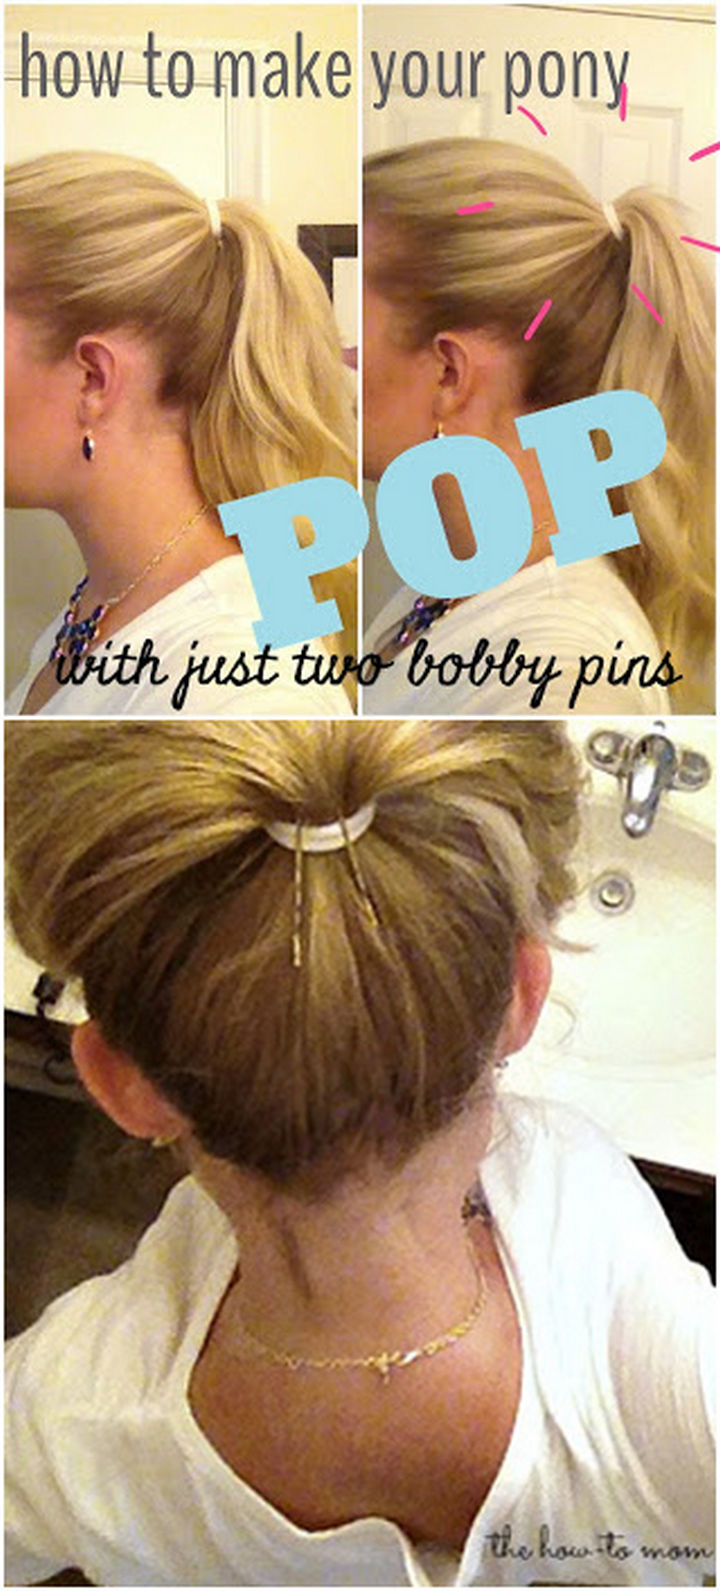 25 Lazy Girl Hair Hacks - Make your ponytail POP with two bobby pins.